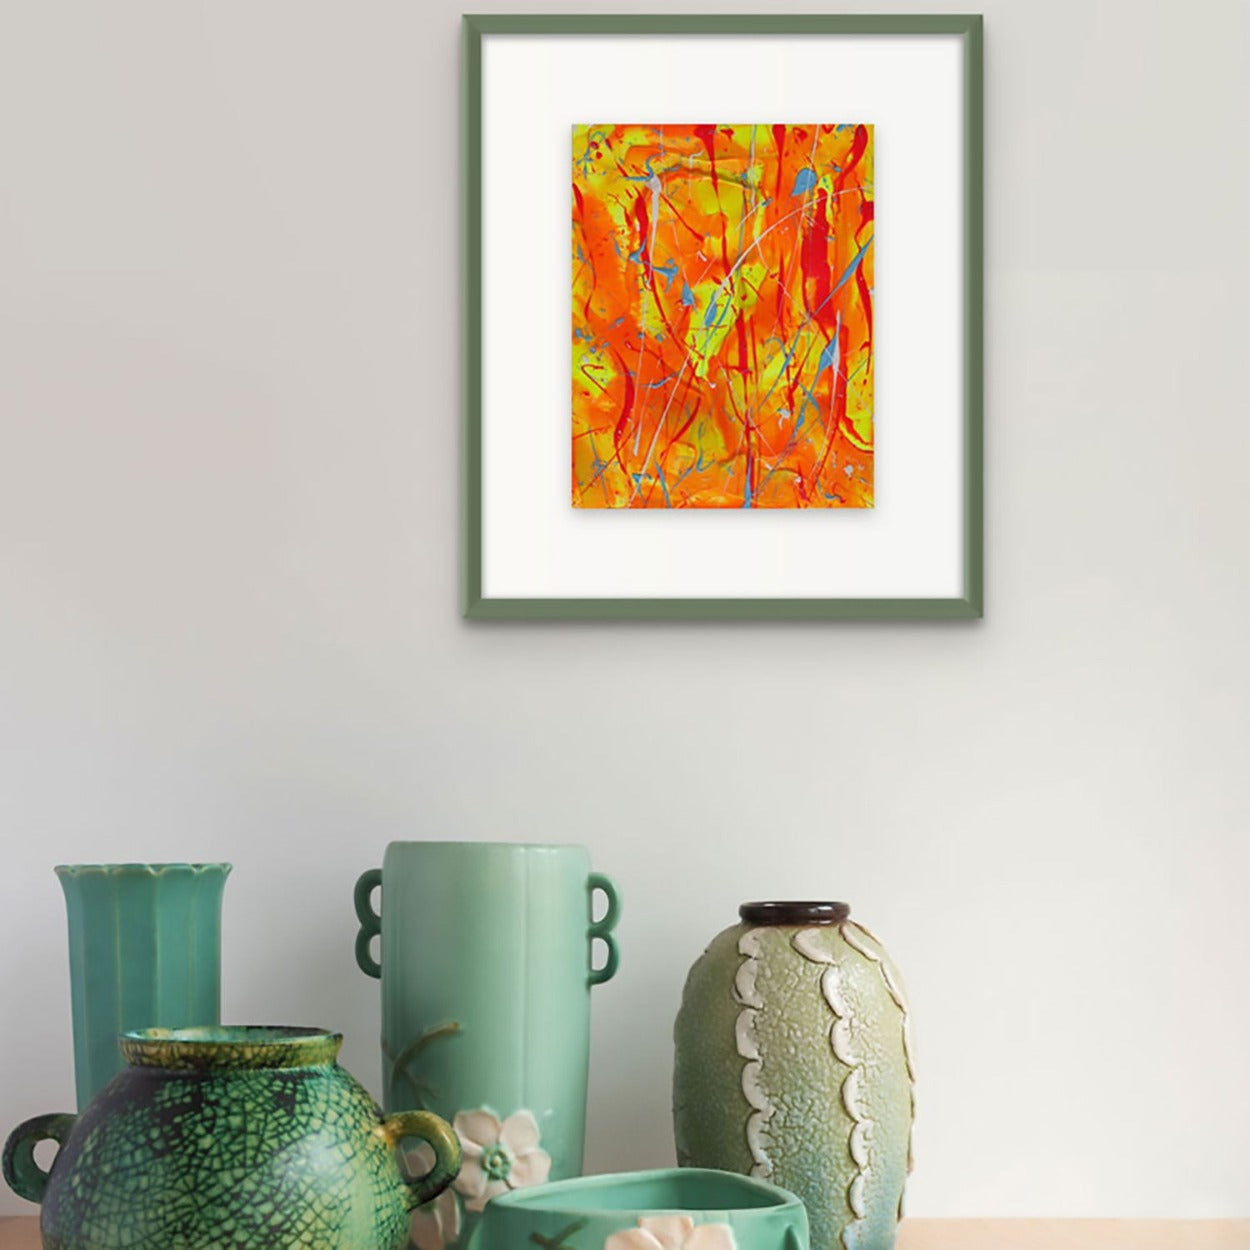 Fire, painting seen as framed in green with white mat hanging on wall. Unique abstract art on paper by Bridget Bradley